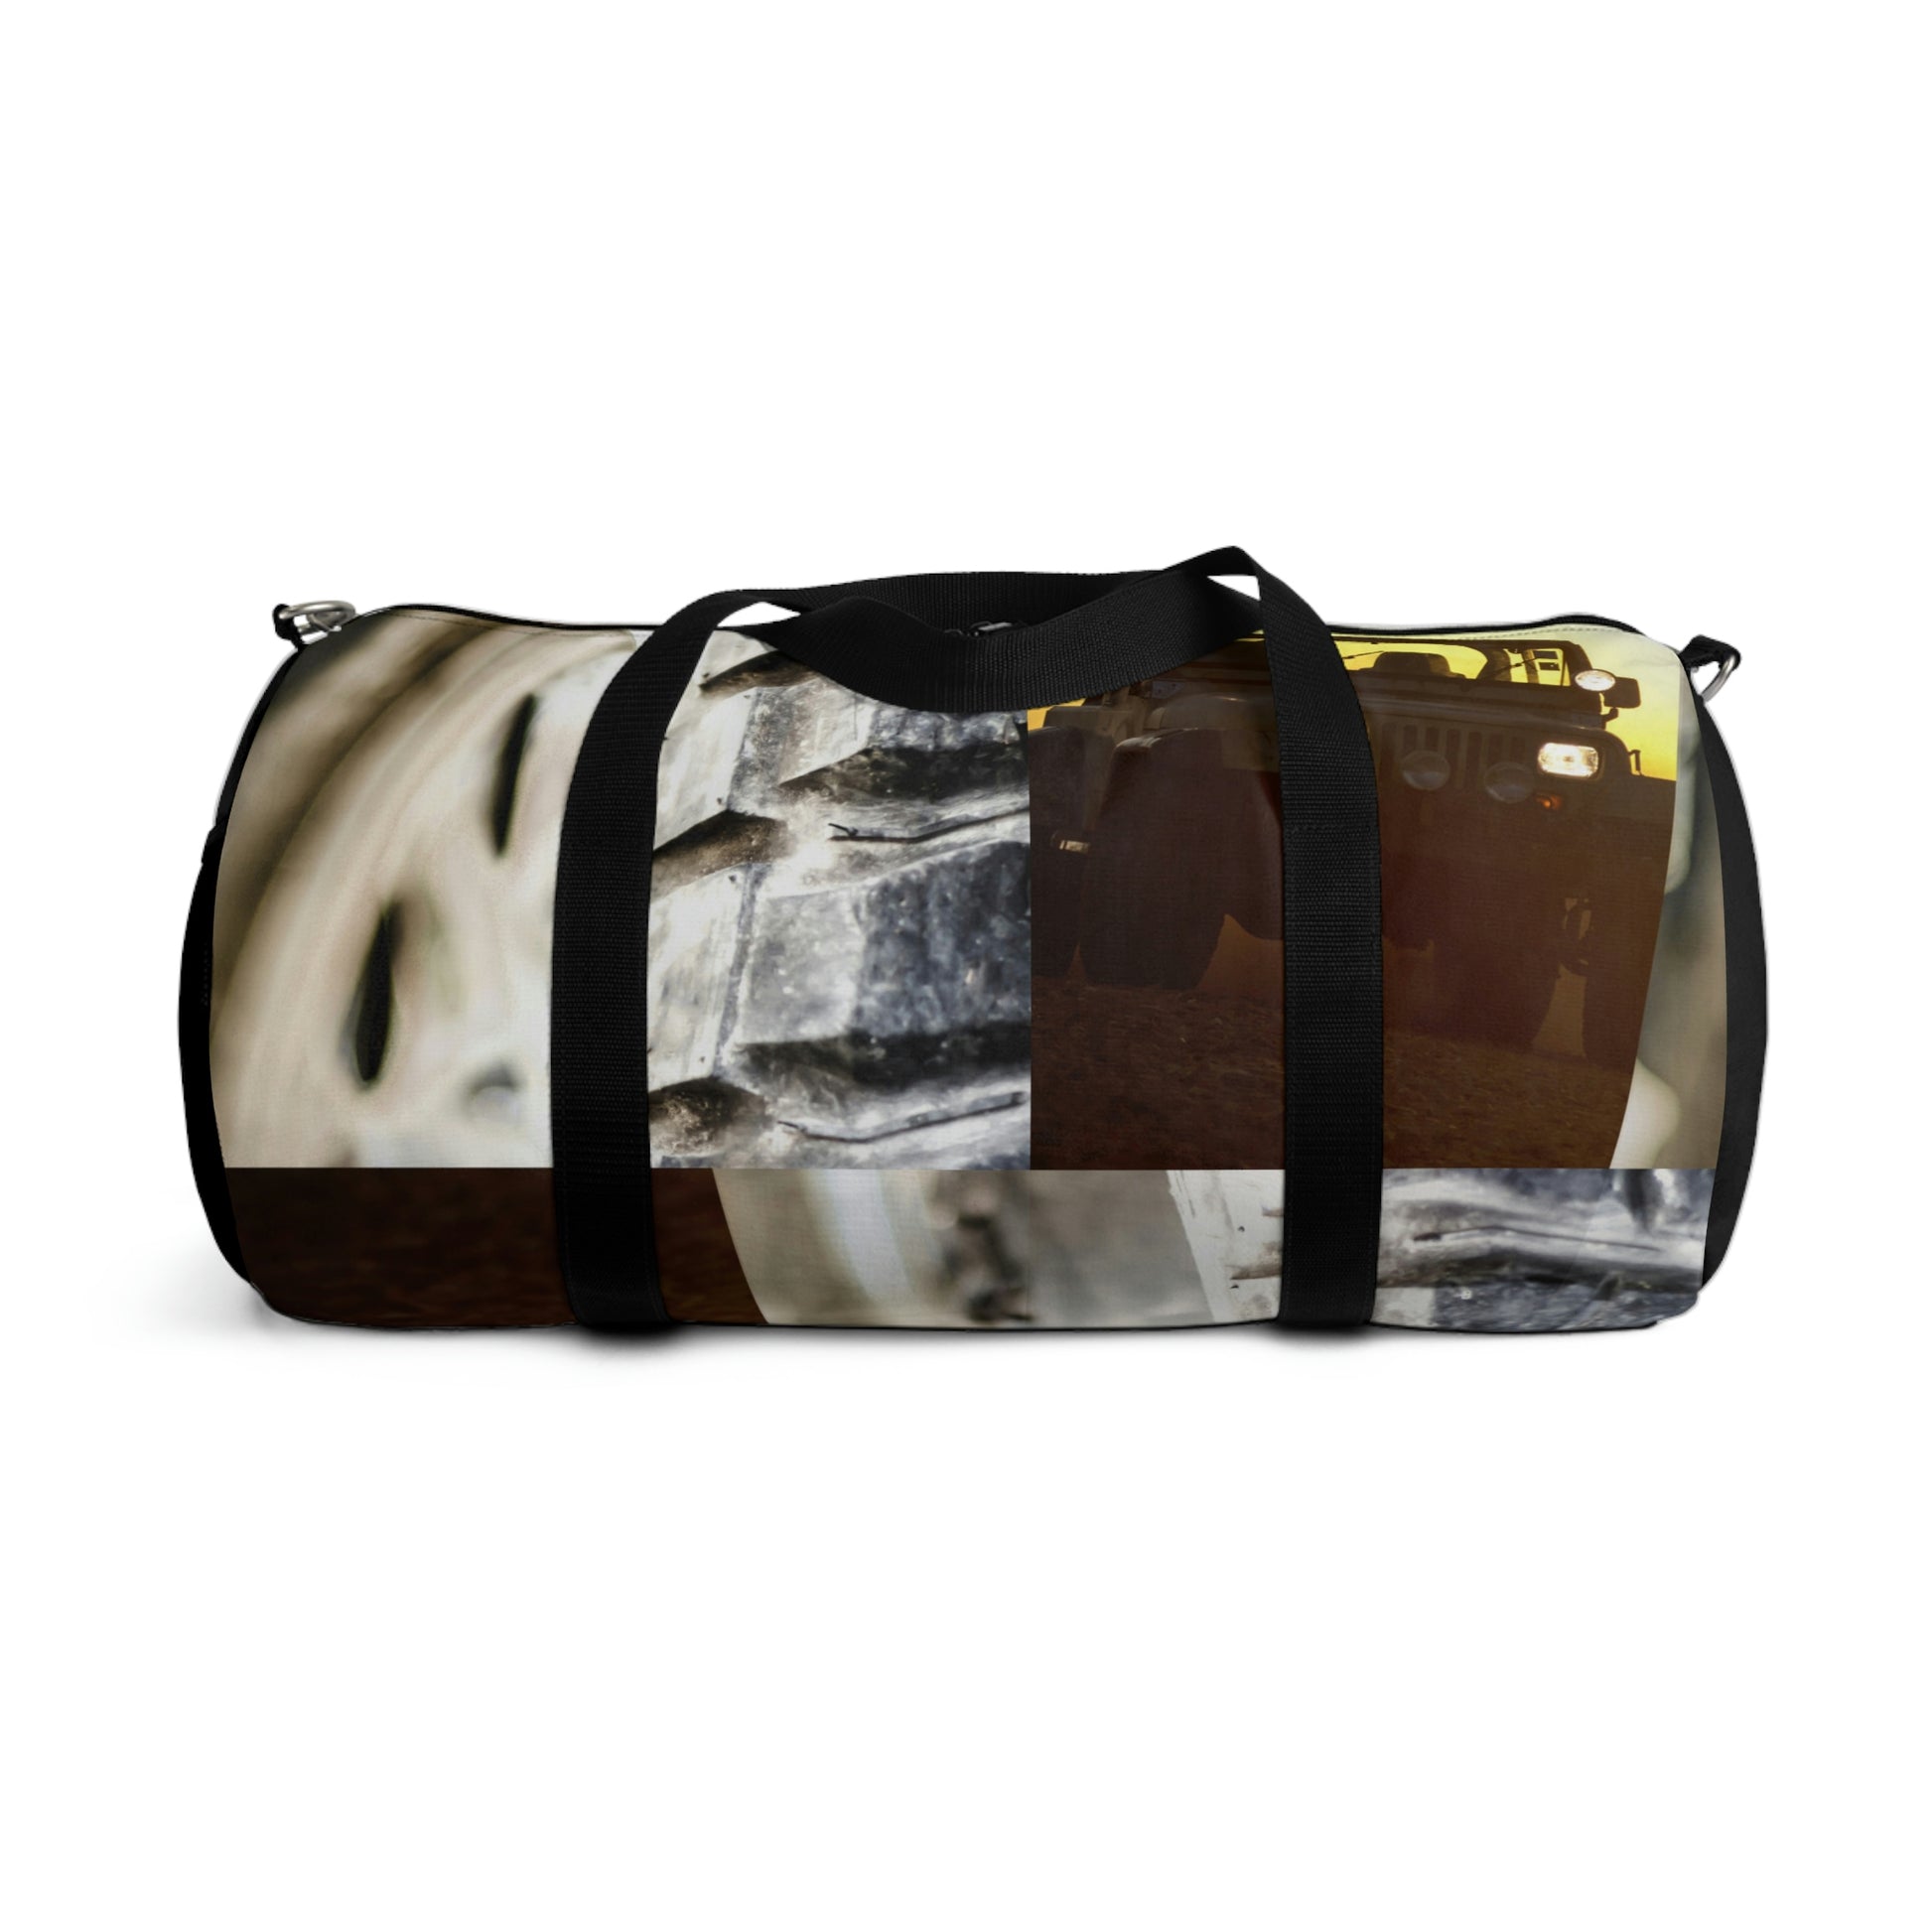 Me & My Ride Duffel Bag | BKLA | Shoes & Accessories | shoes, hats, phone covers, tote bags, clutch bags